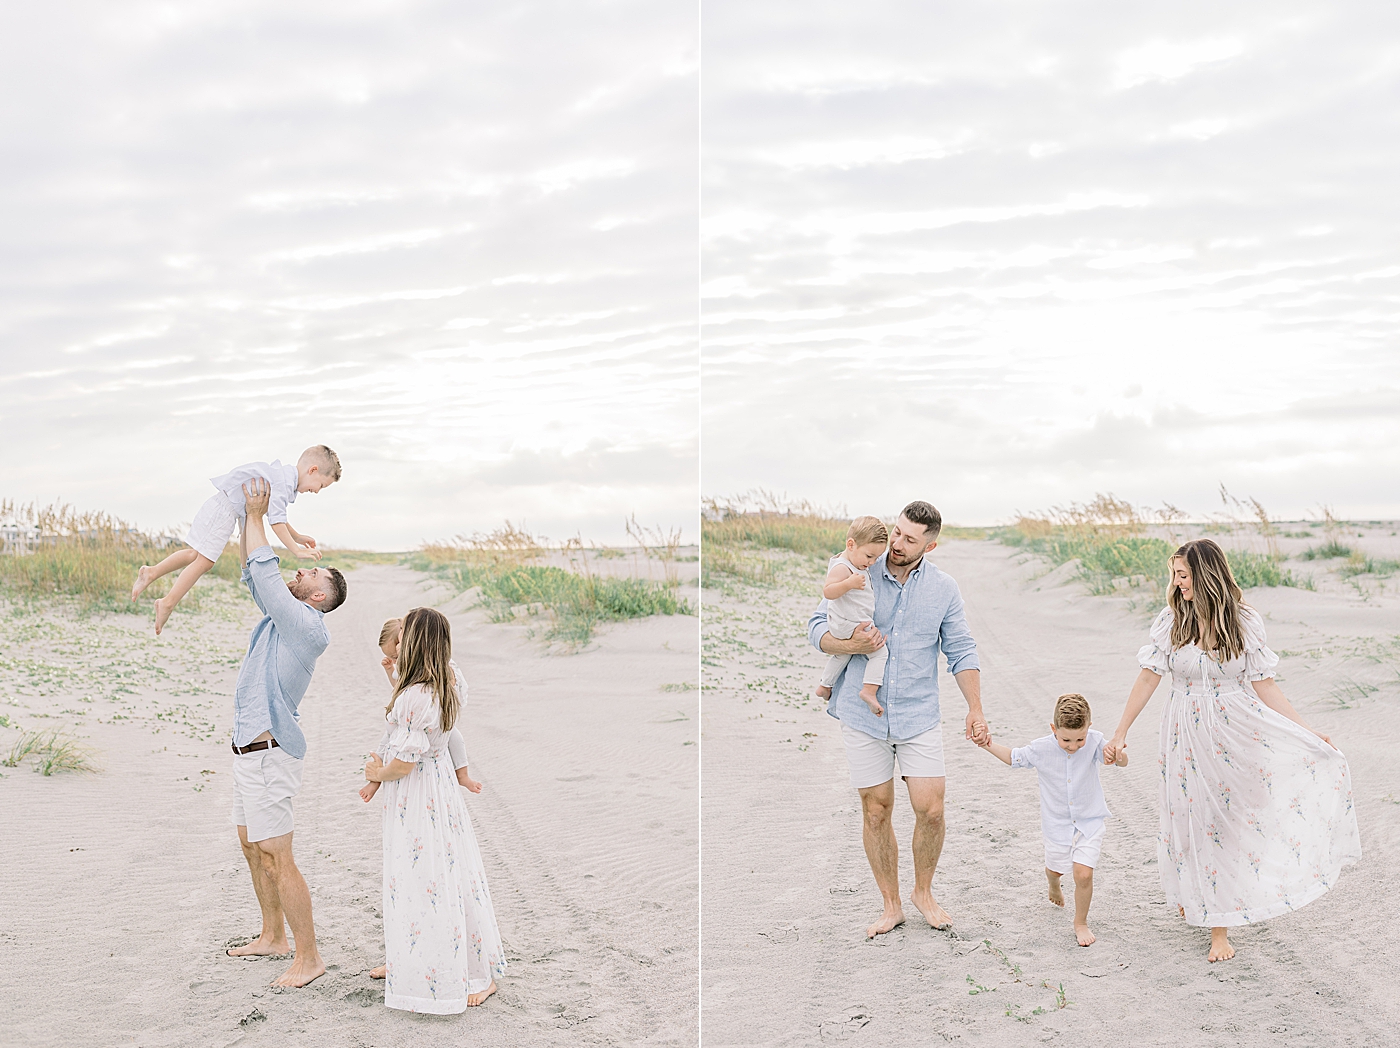 Family of four playing on the beach at sunset | Preparing for Family Beach Session with Caitlyn Motycka